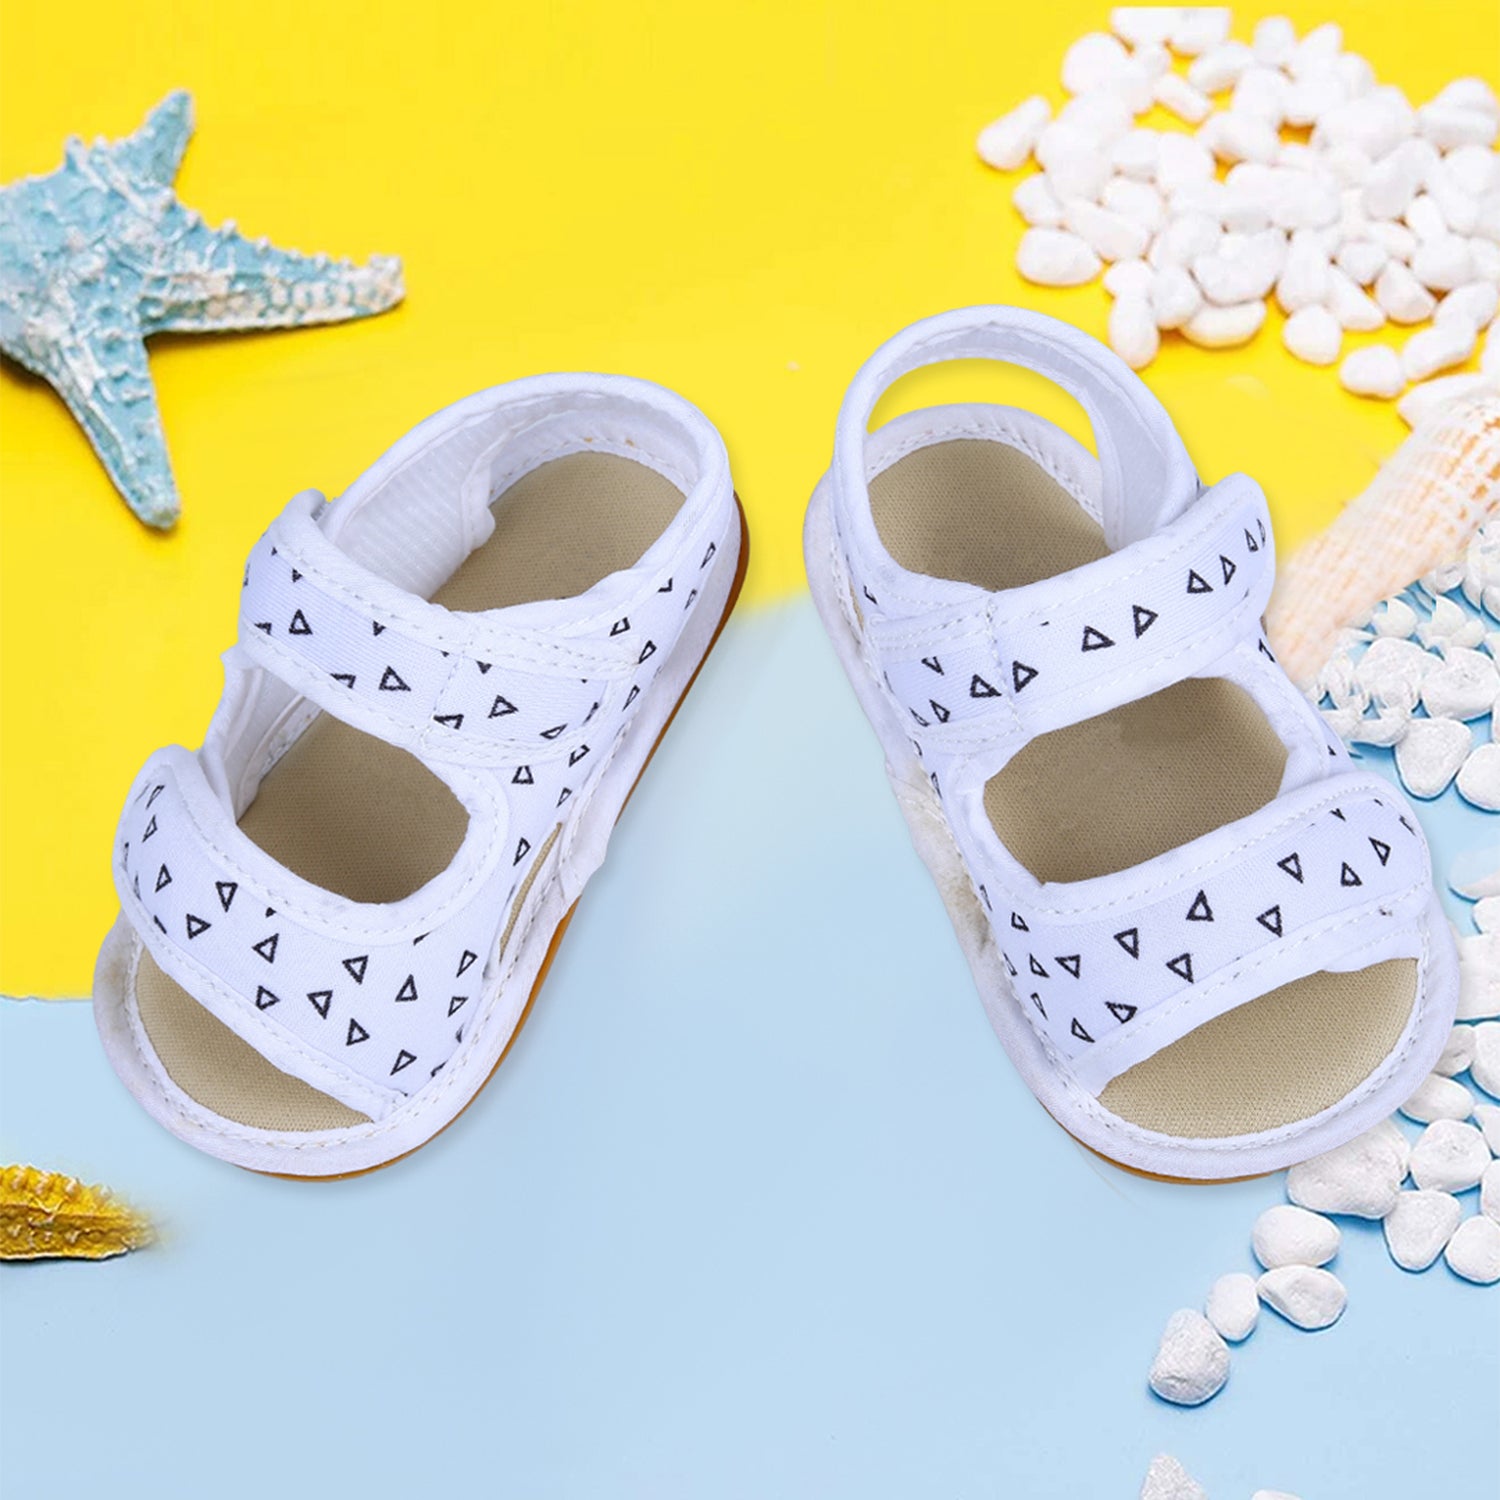 Baby Moo Triangle Comfortable Anti-skid Floater Sandals - White